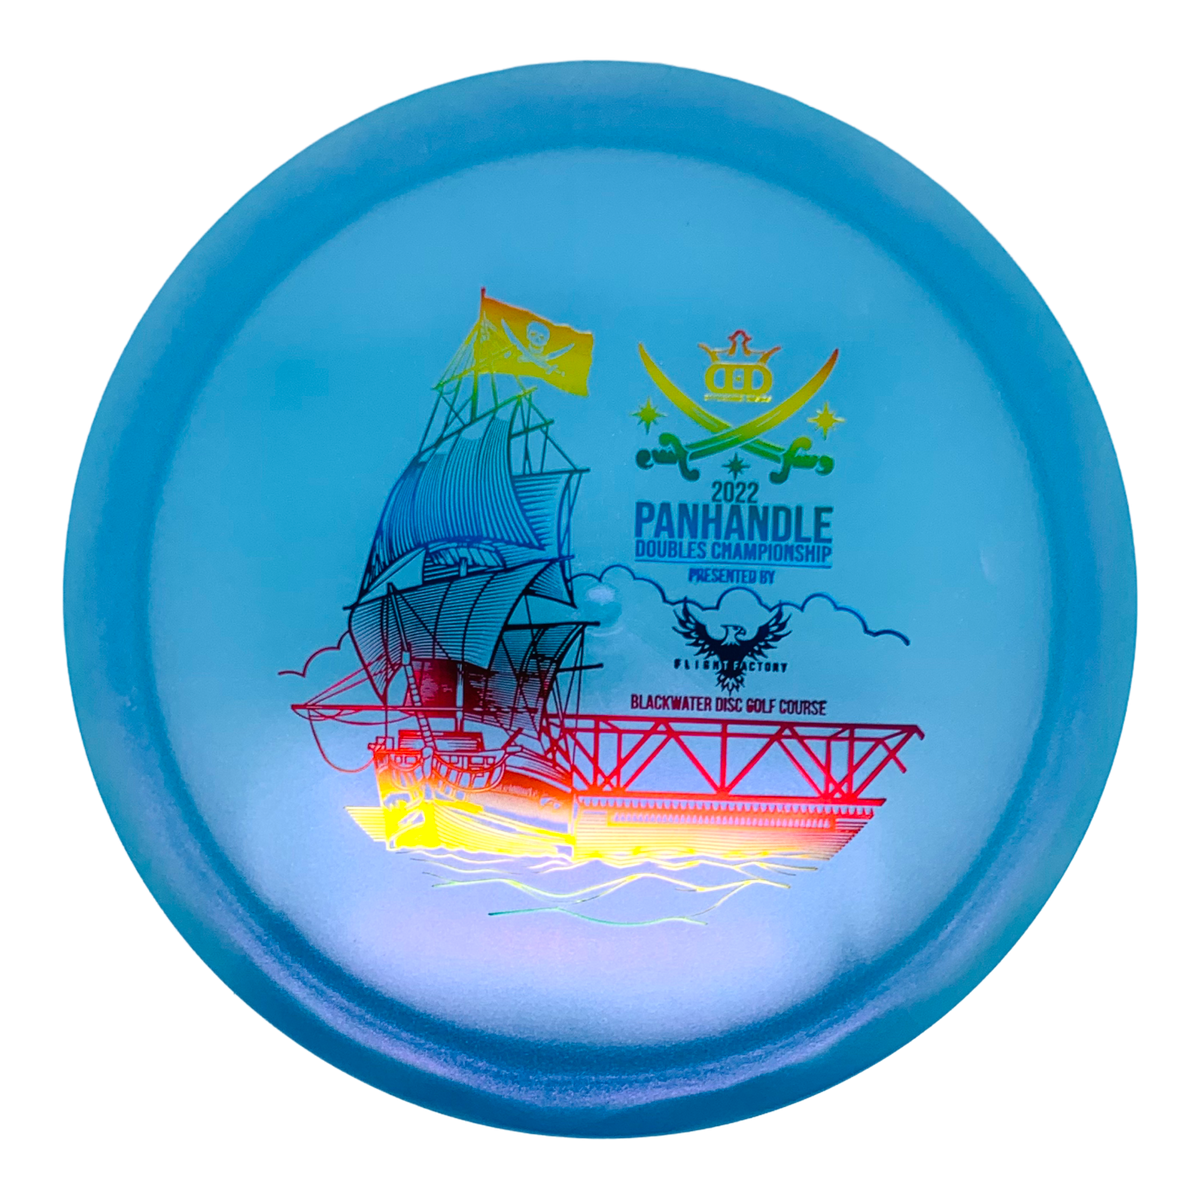 Latitude 64 Opto Glimmer River - 2022 Panhandle Doubles